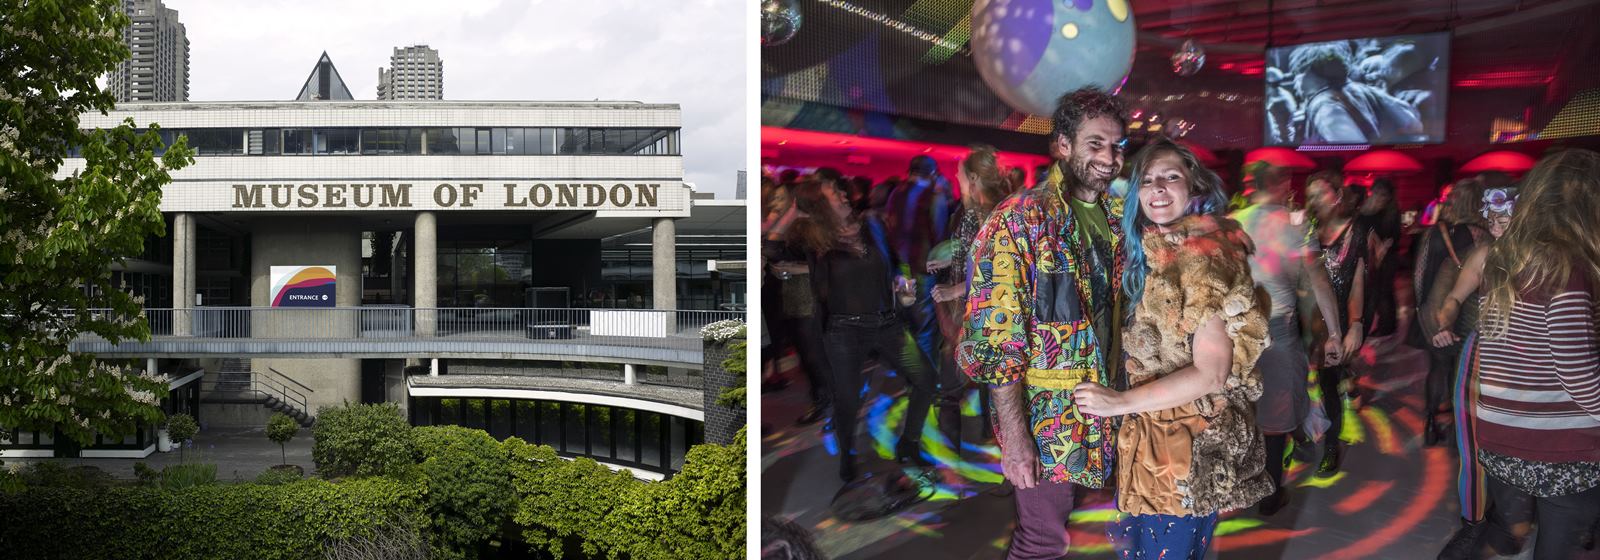 The Museum of London’s site at London Wall (left) will close on 4 December with a music weekend festival (right) © Museum of London